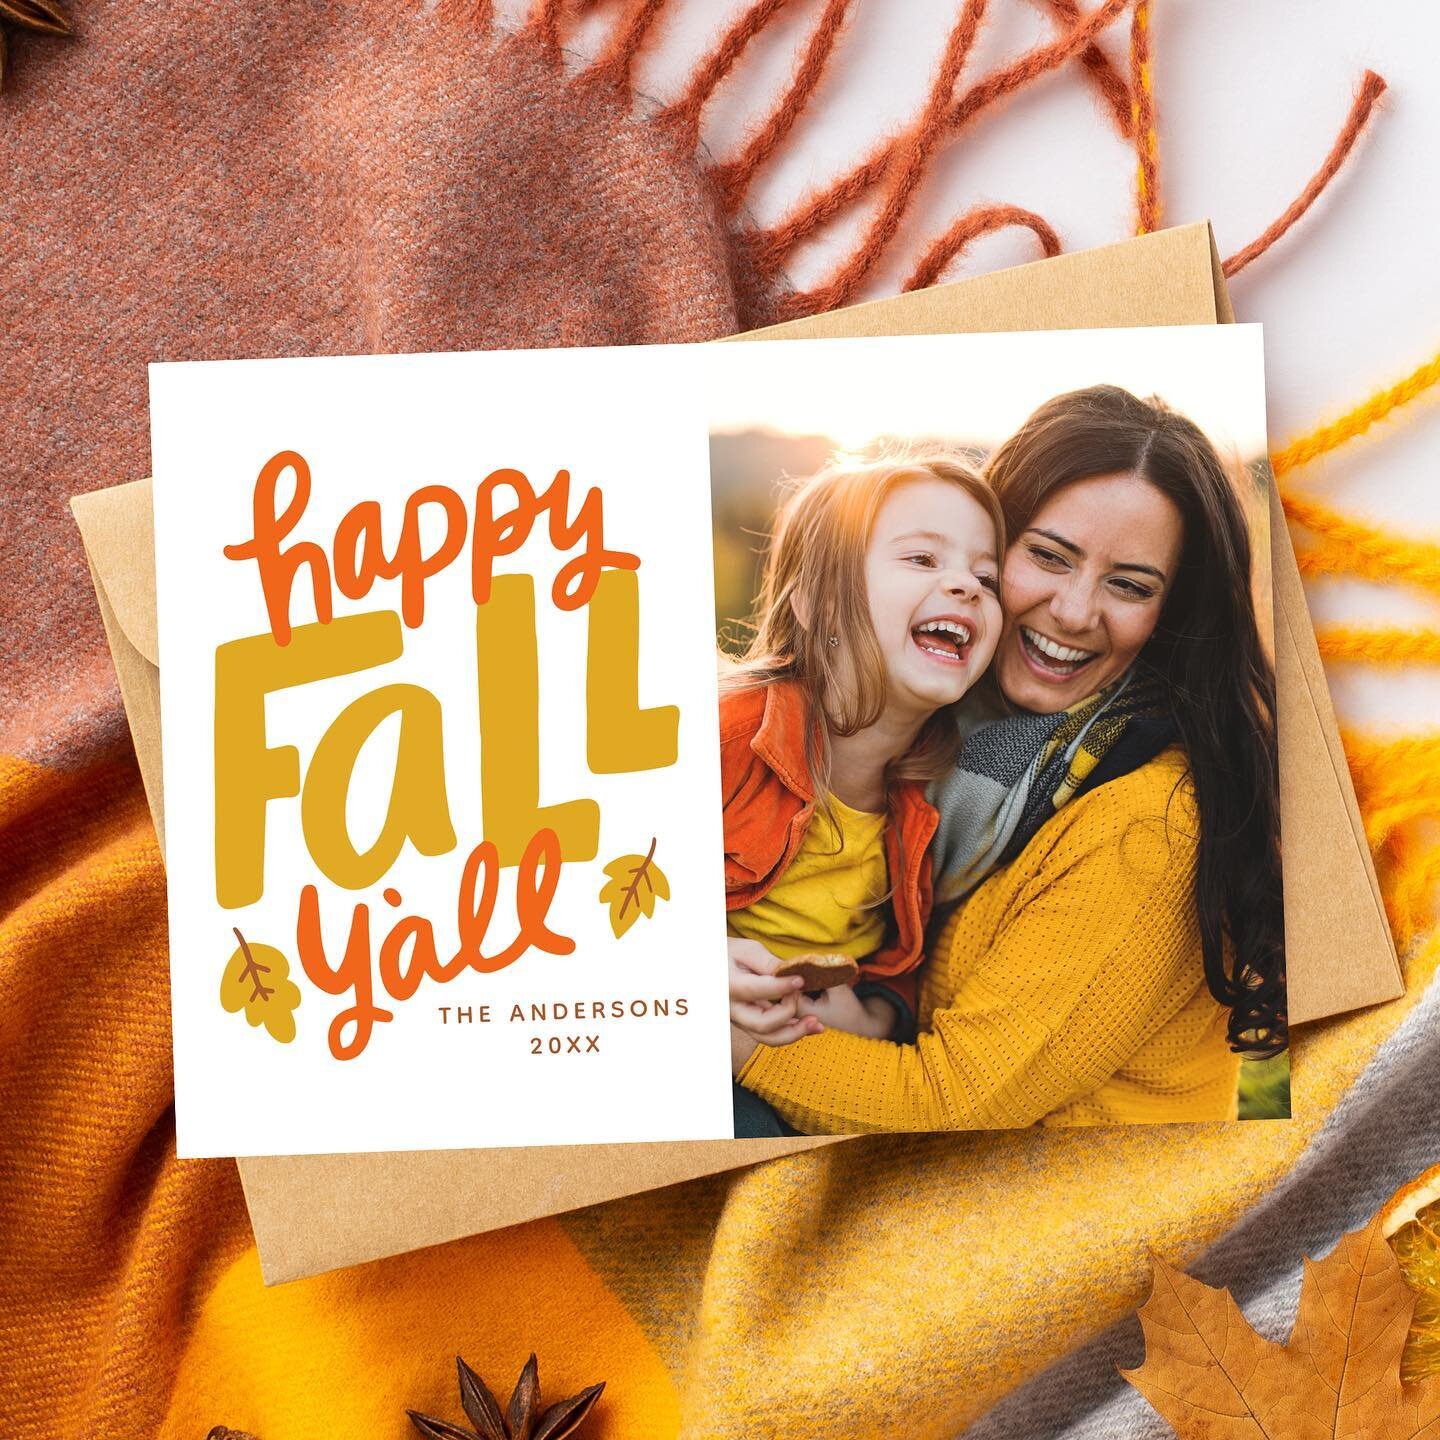 Looking for an excuse to show off your new family photos? Our &quot;Happy Fall Y'all&quot; photo cards are perfect to send to your family and friends. Link in bio. 🍂